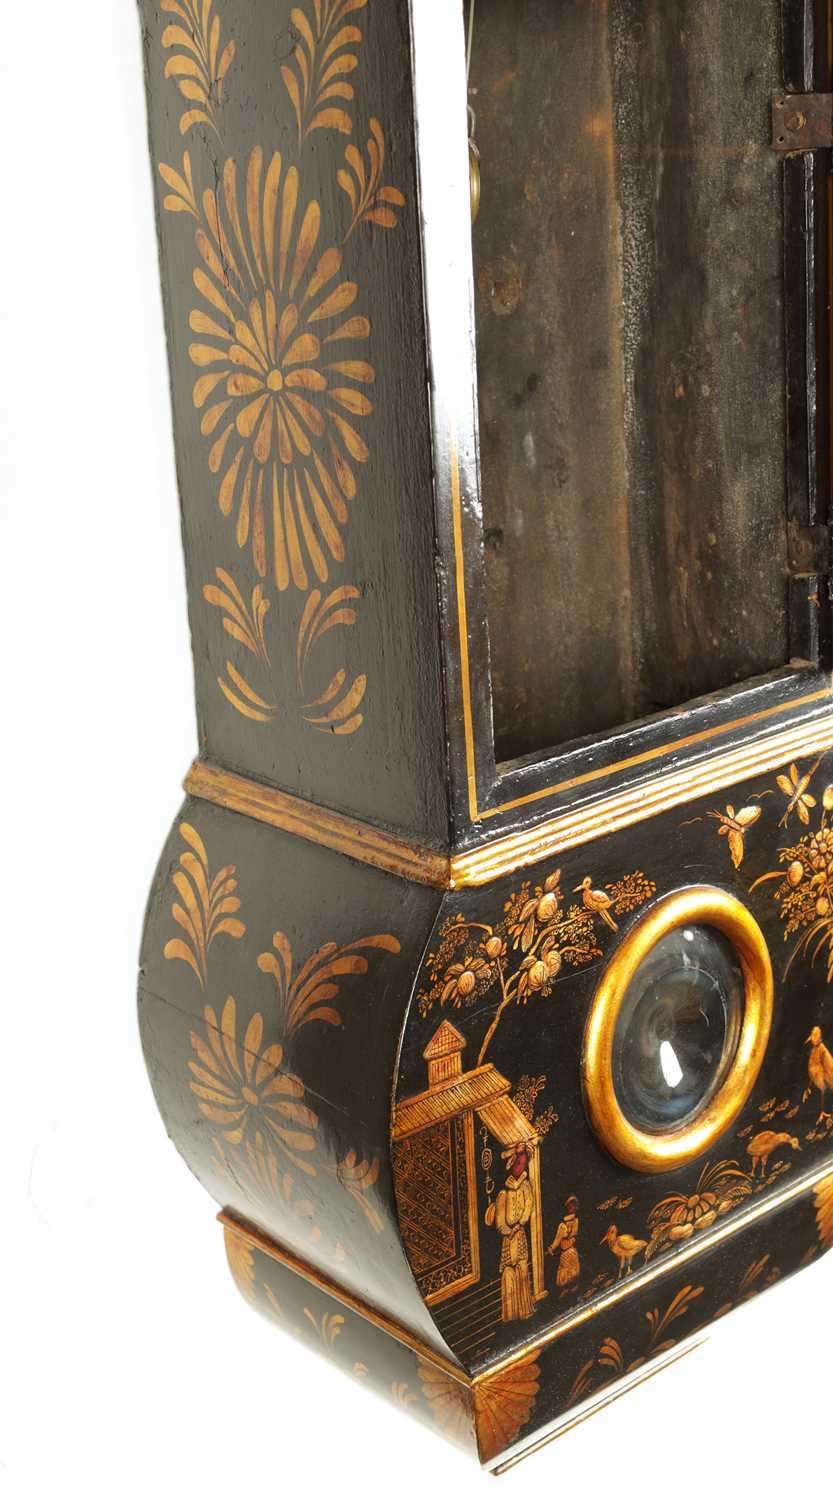 JOHN TICKELL, CREDITON. A RARE EARLY 18TH CENTURY LACQUERED CHINOISERIE TAVERN CLOCK OF LARGE SIZE - Image 7 of 21